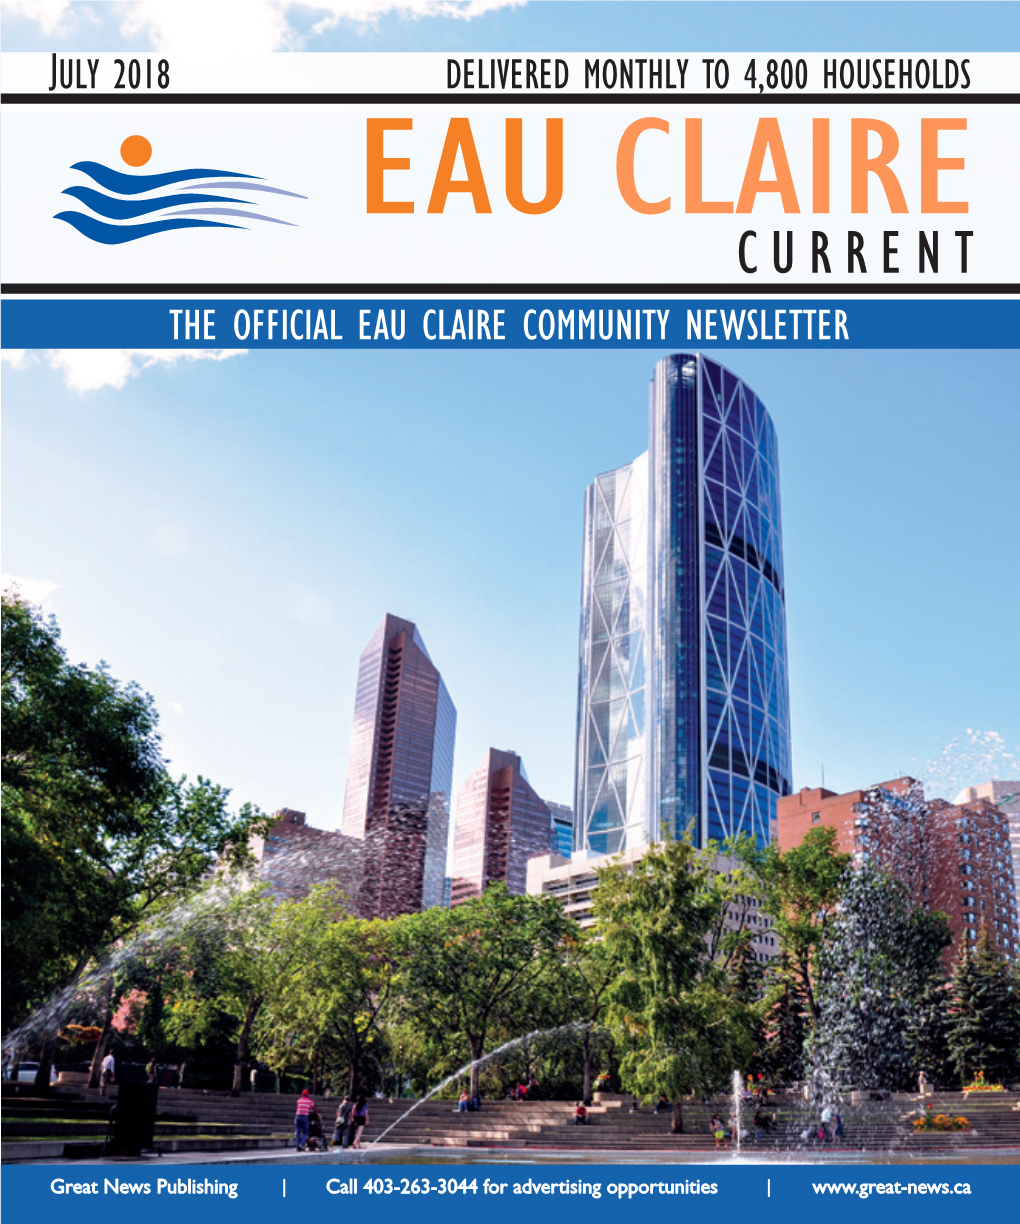 THE OFFICIAL EAU CLAIRE COMMUNITY NEWSLETTER Integrative Dentistry: We Care About Your Whole Body Health